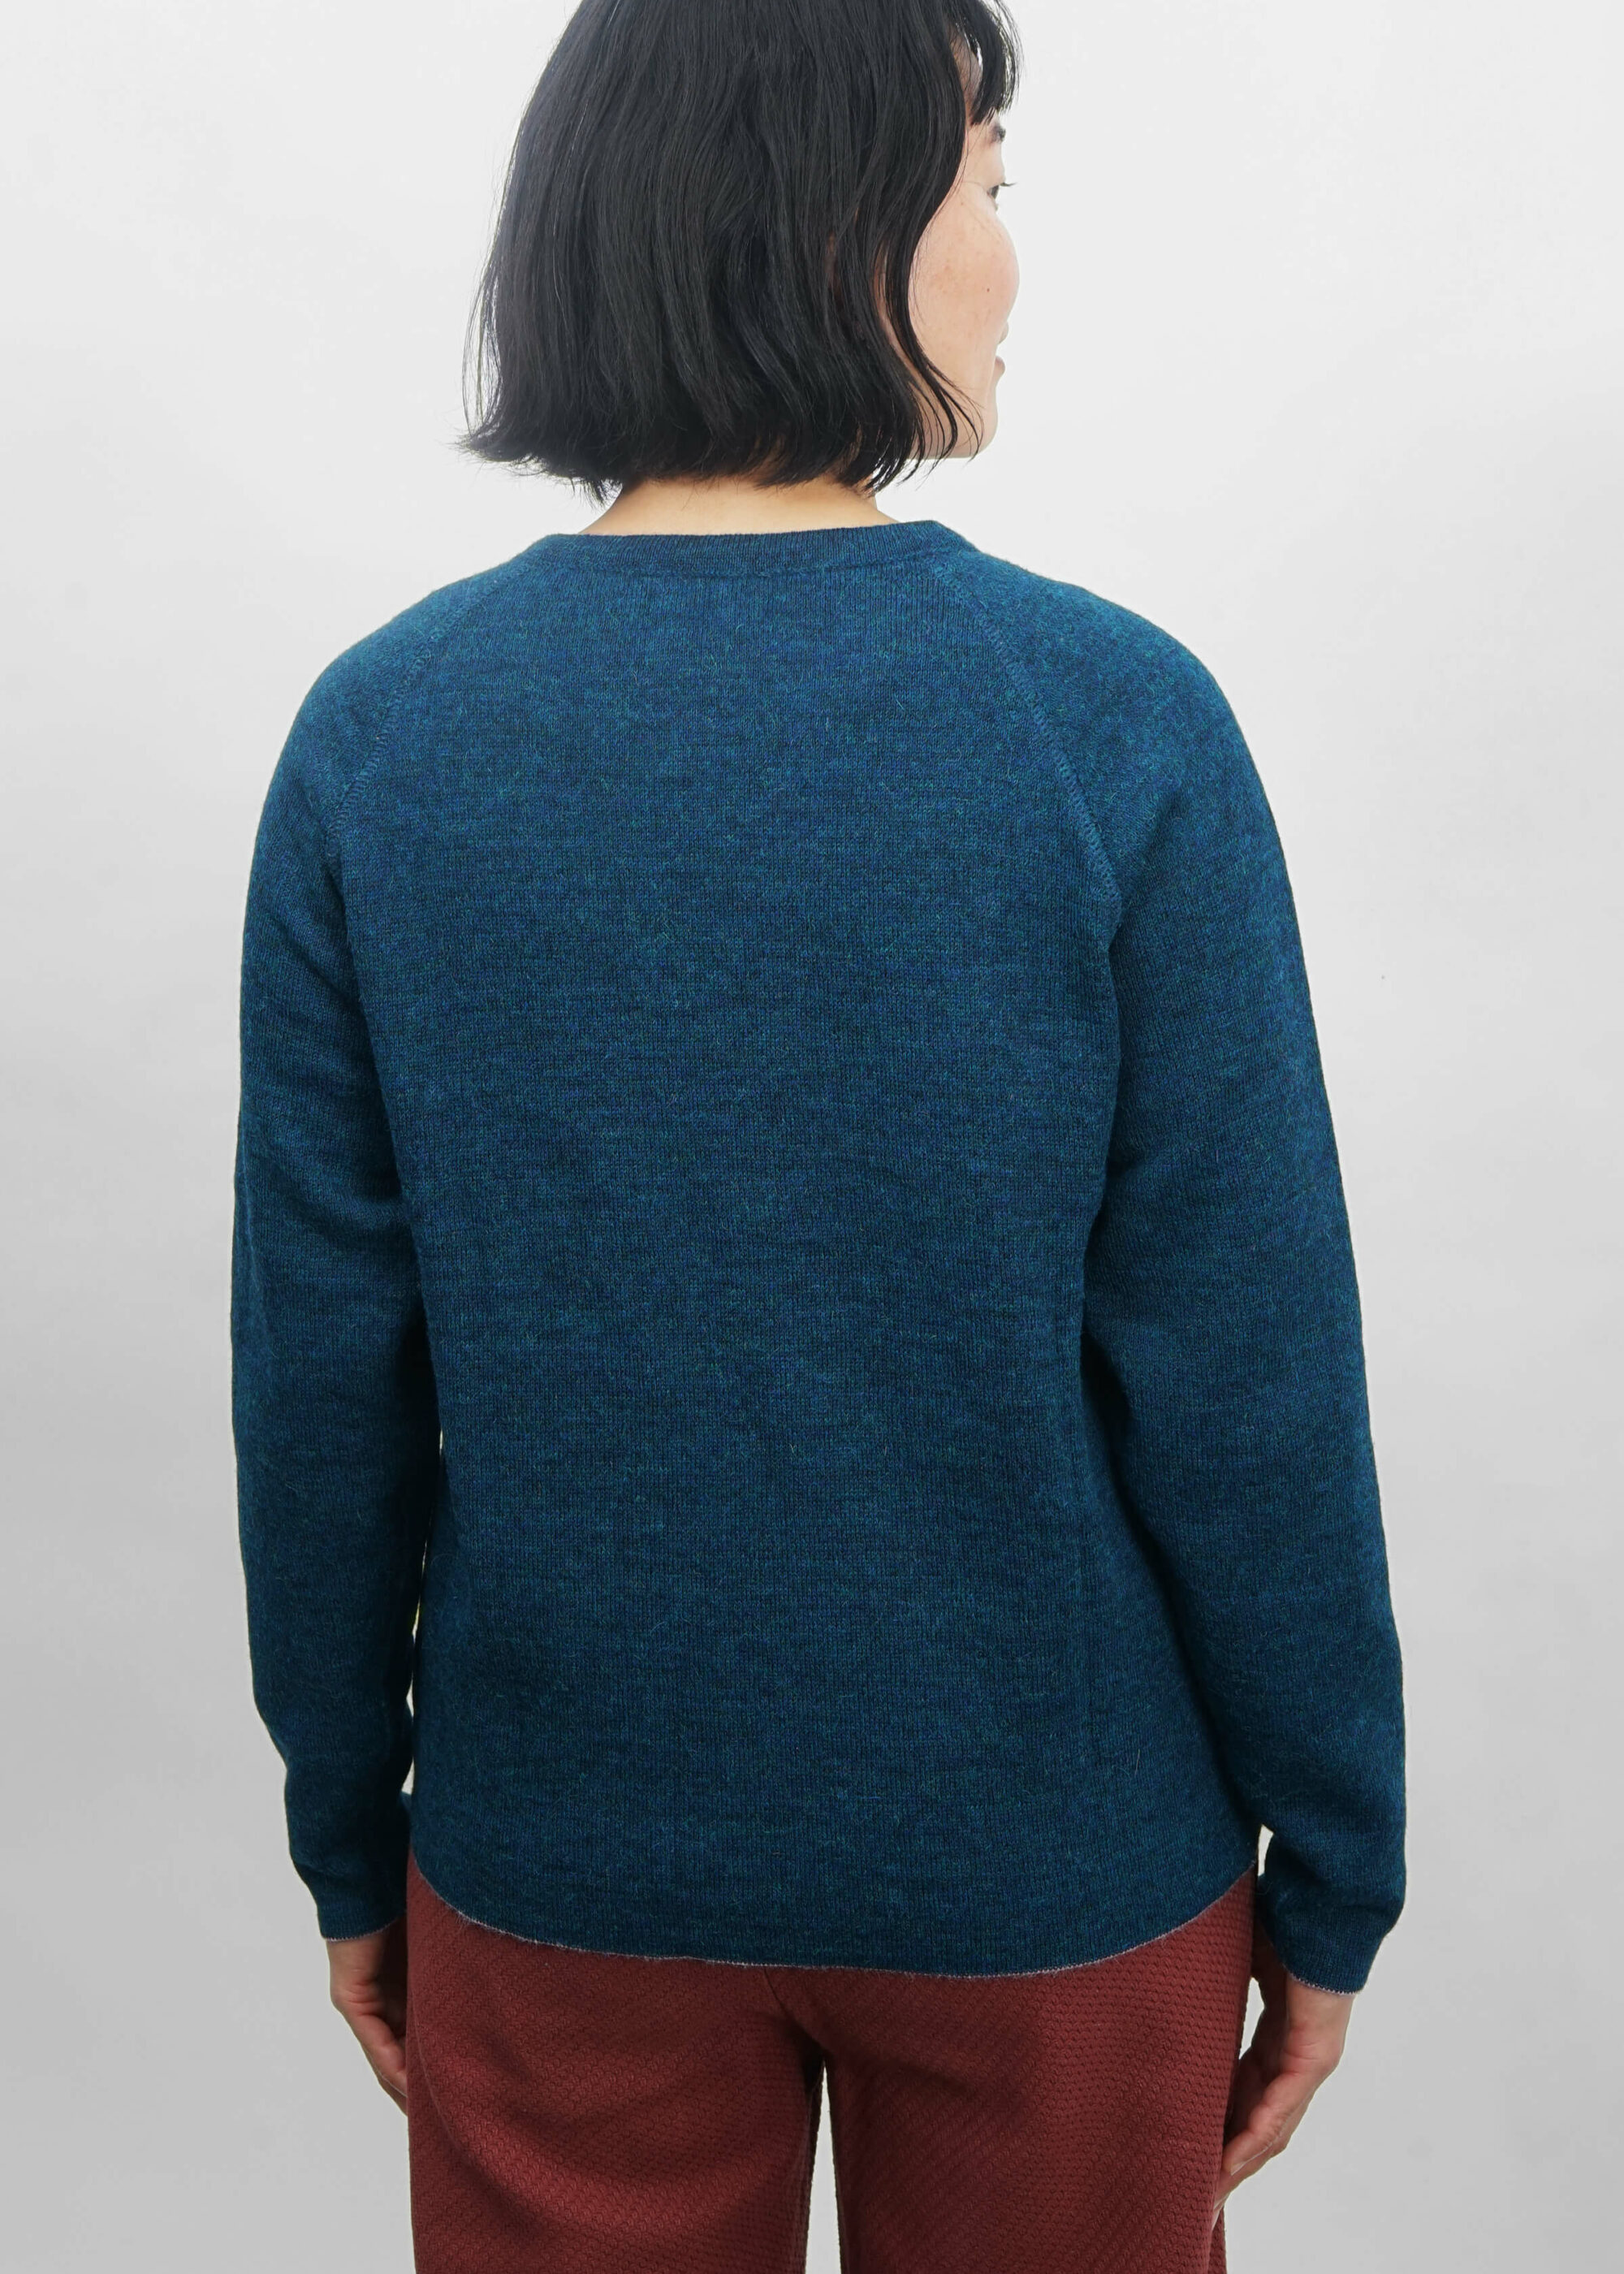 Product image for »Perriand« Reversible Sweater Alpaca